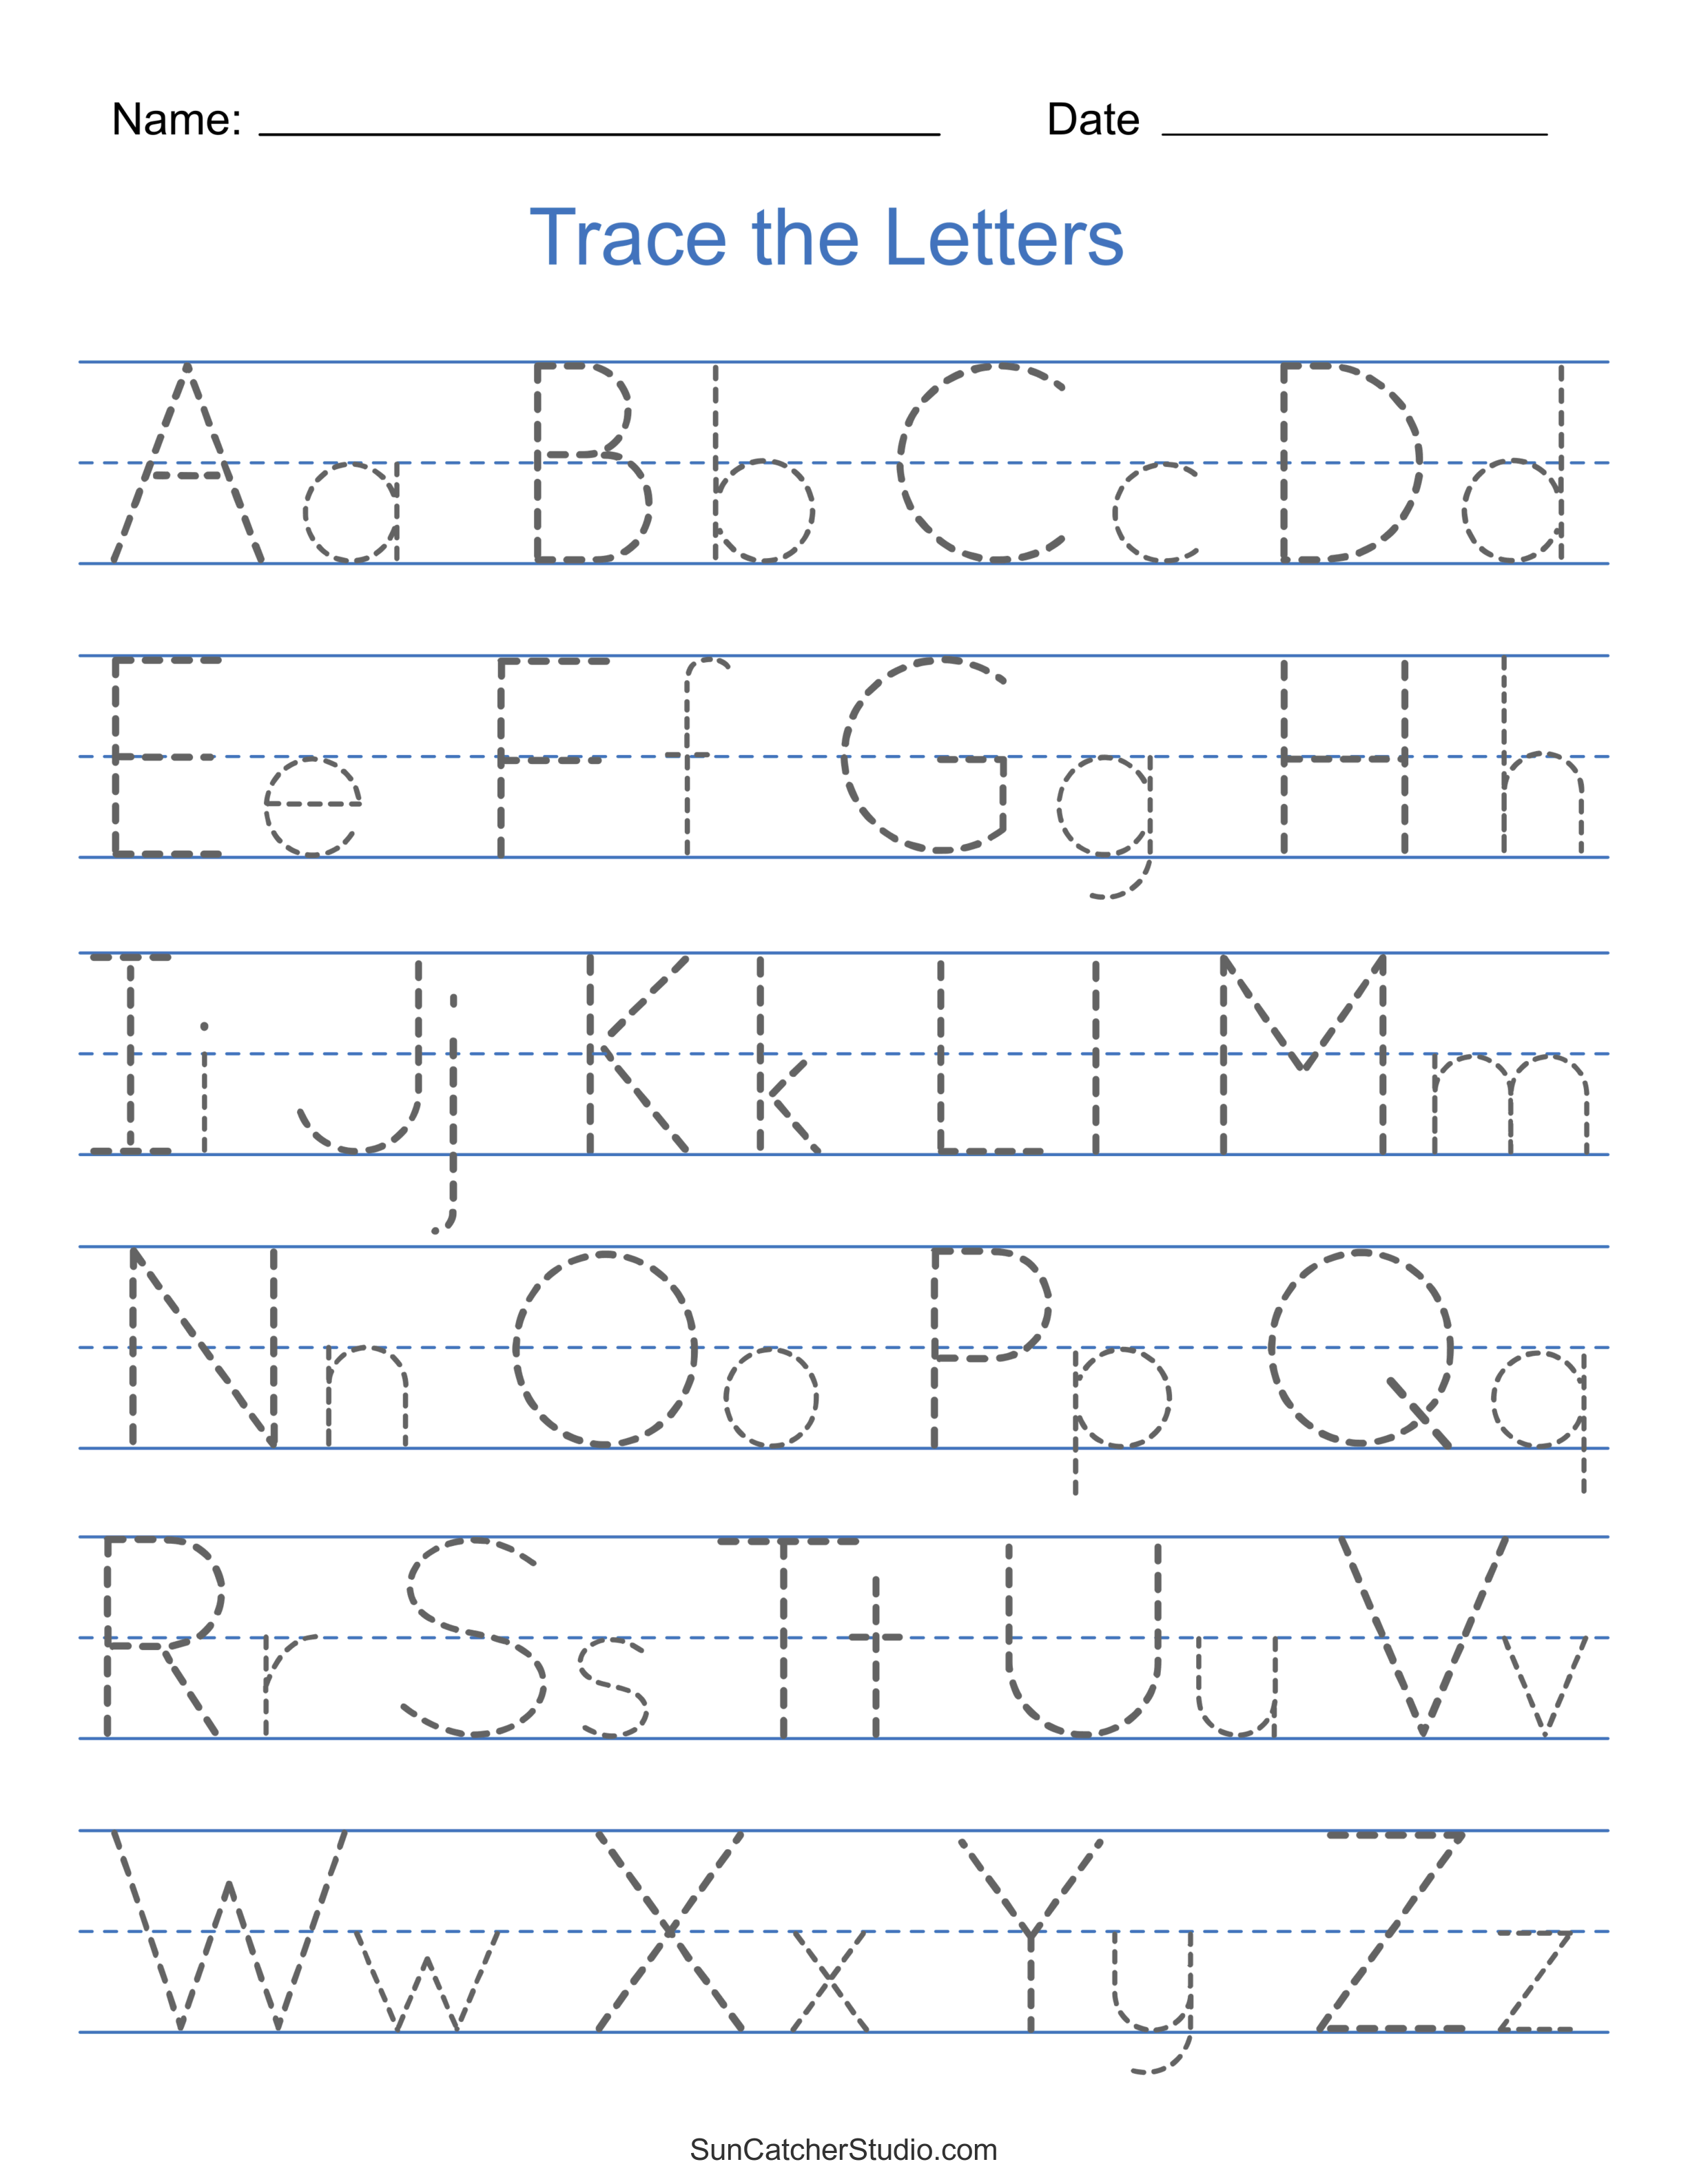 Tracing Alphabet Letters Printable Handwriting Worksheets DIY Projects Patterns Monograms Designs Templates - Free Printable Alphabet Worksheets